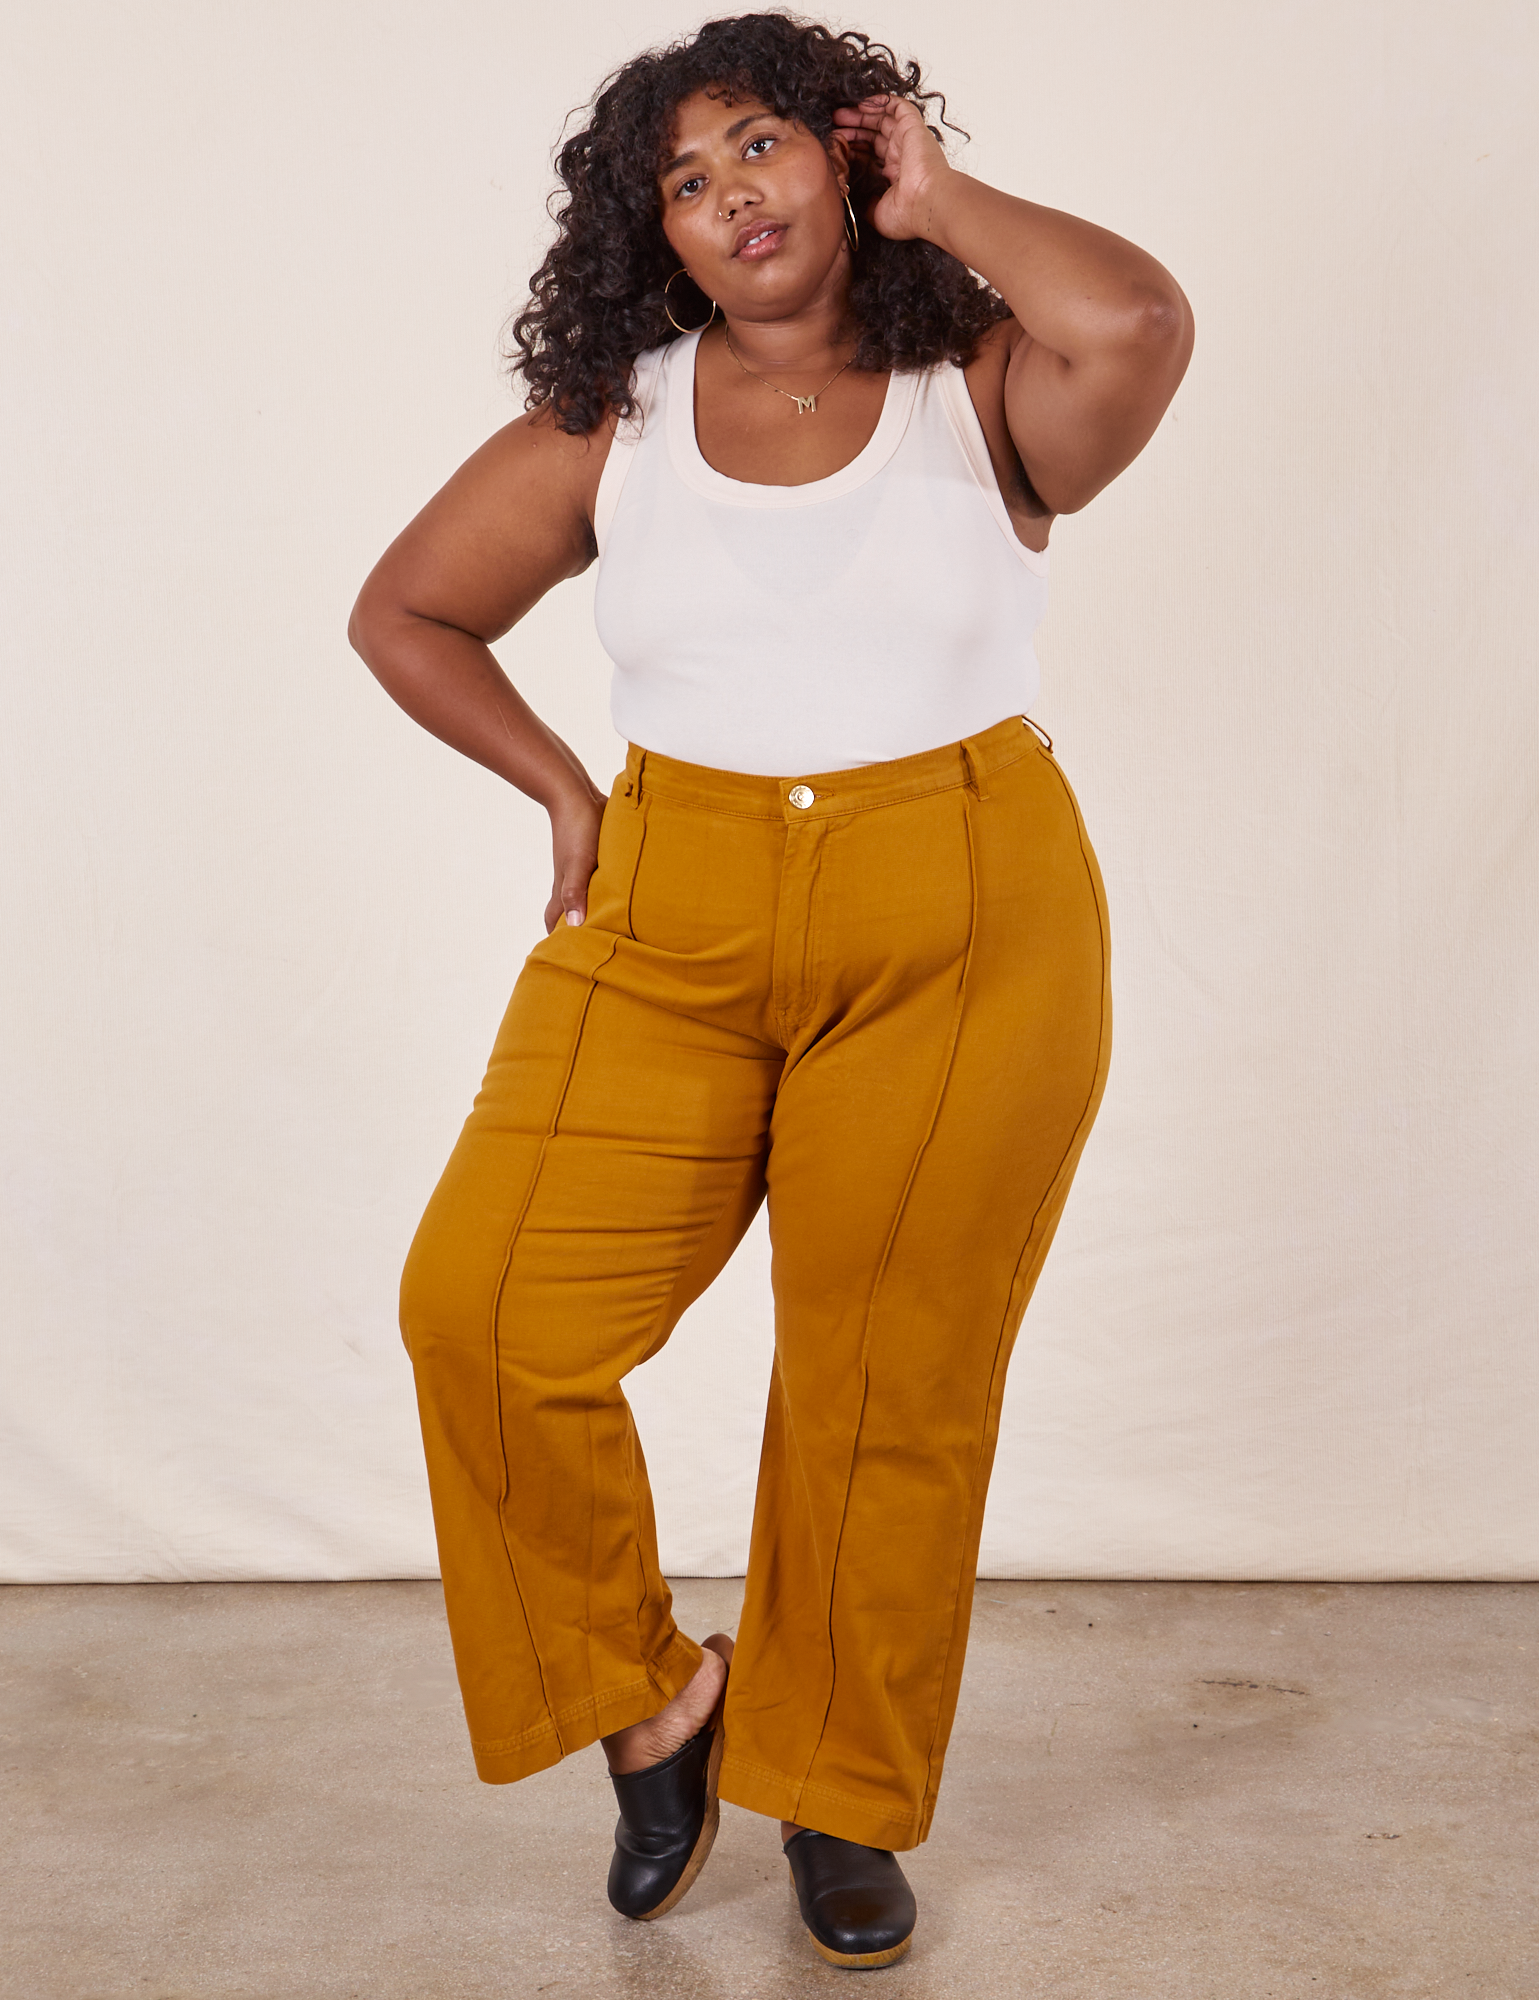 Morgan is 5&#39;5&quot; and wearing 1XL Western Pants in Spicy Mustard paired with vintage off-white Tank Top